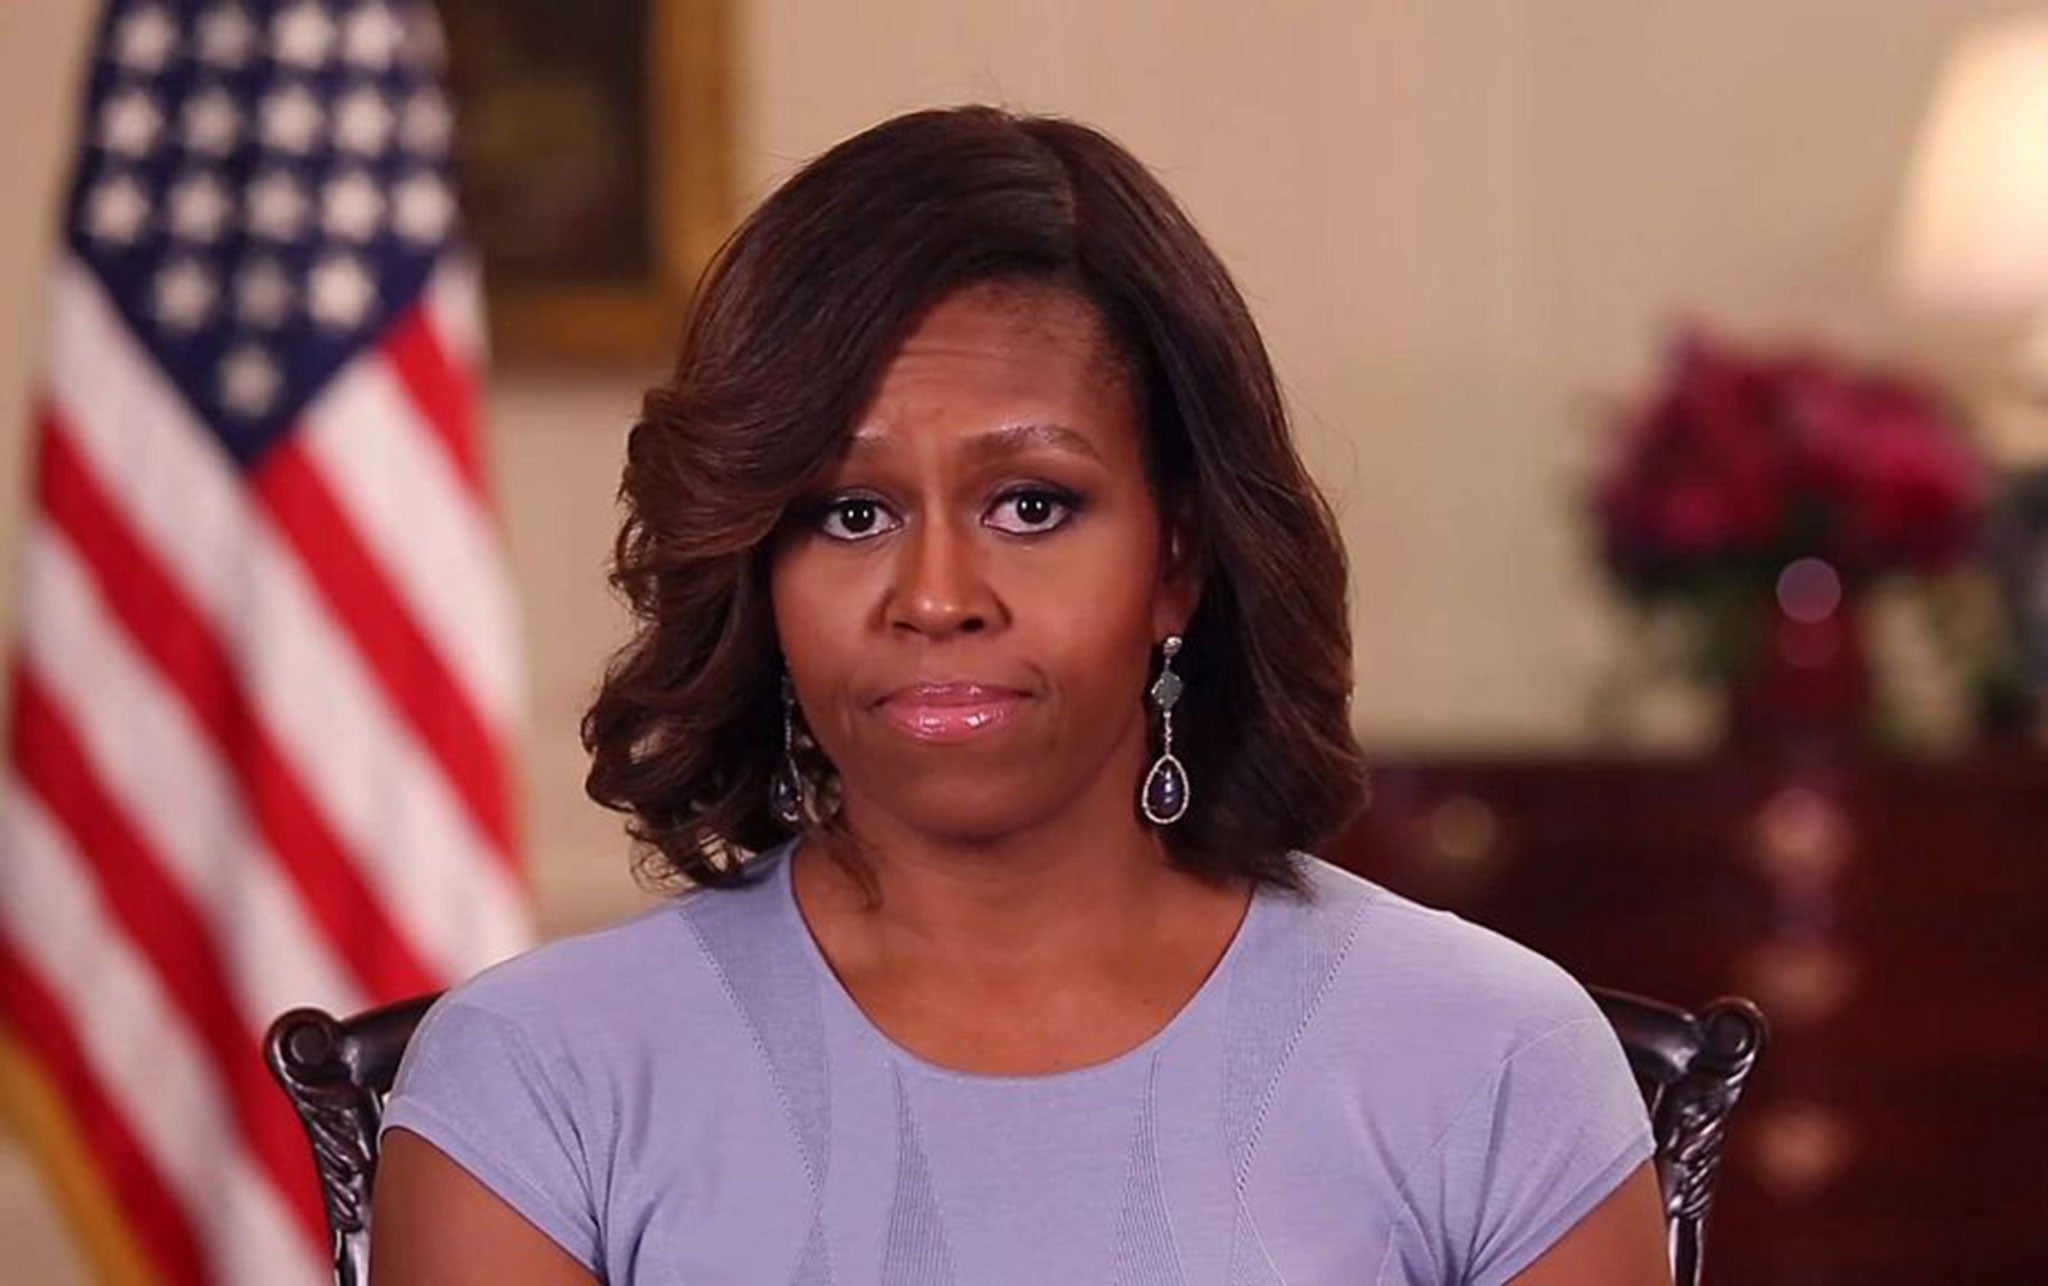 Taking over the President's weekly radio address ahead of Mother's Day in the US, Michelle Obama said she and Mr Obama are 'outraged and heartbroken' over the kidnapping of more than 250 Nigerian schoolgirls